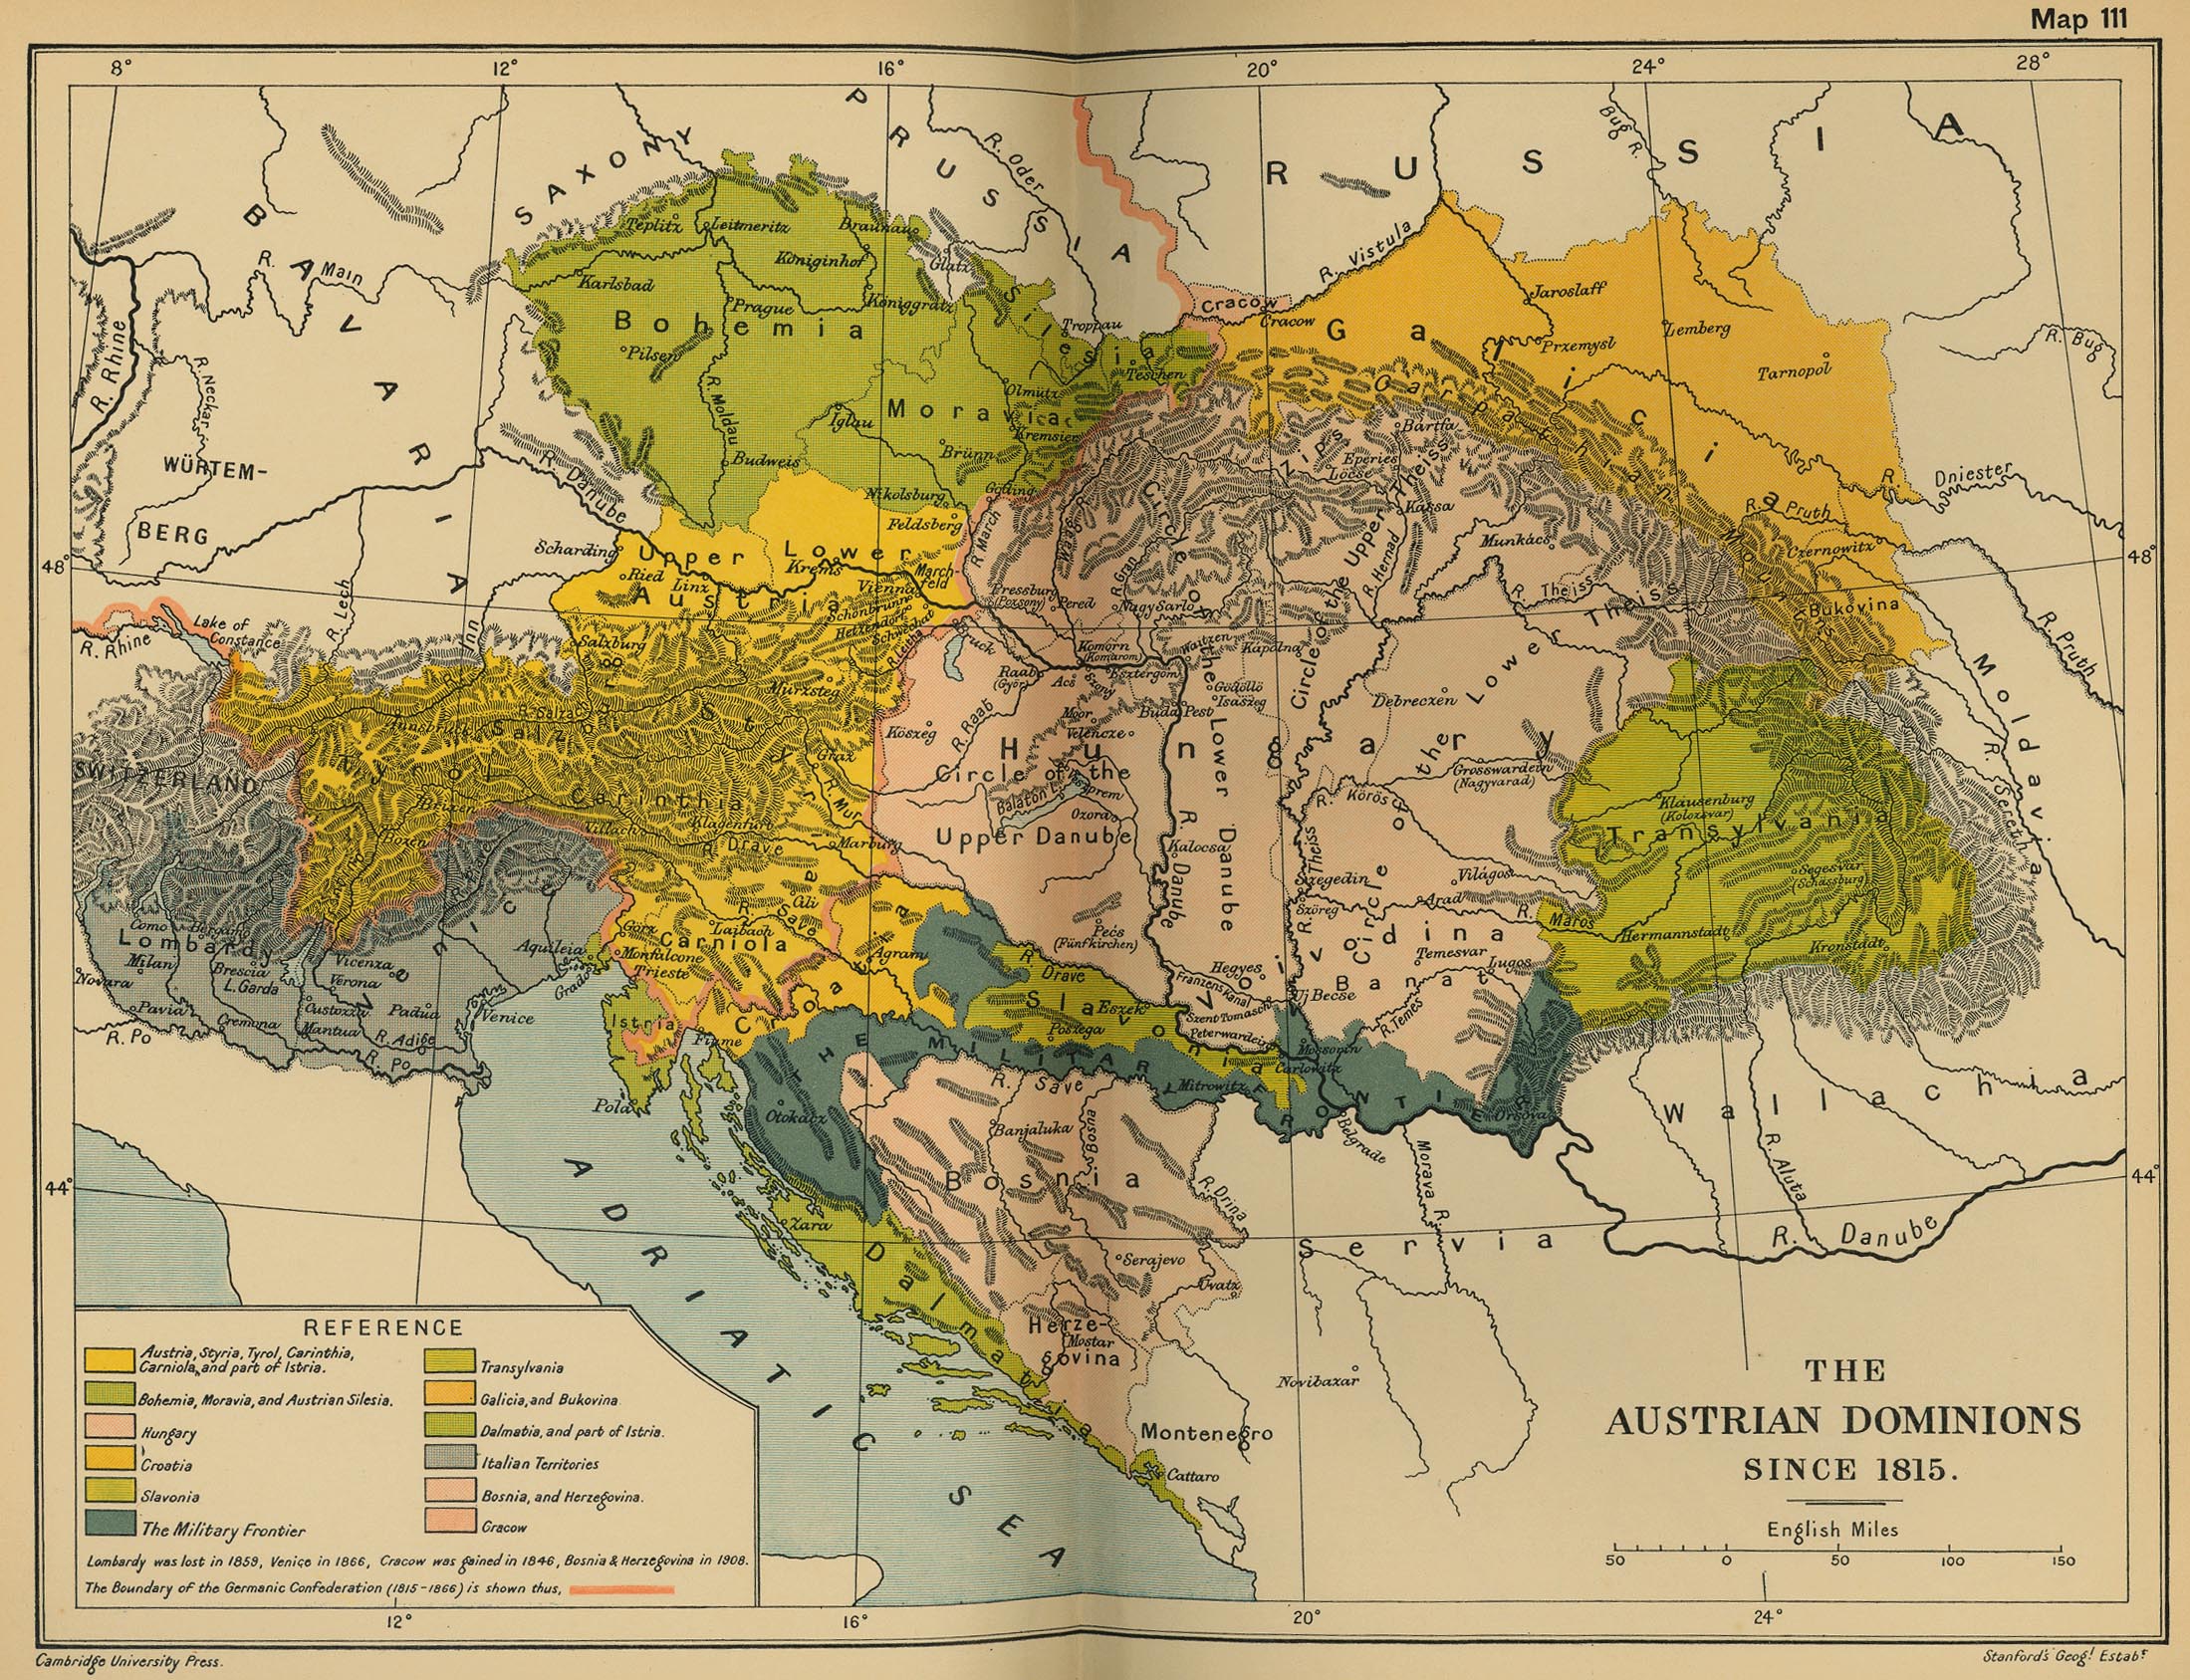 Map of the Austrian Dominions since 1815